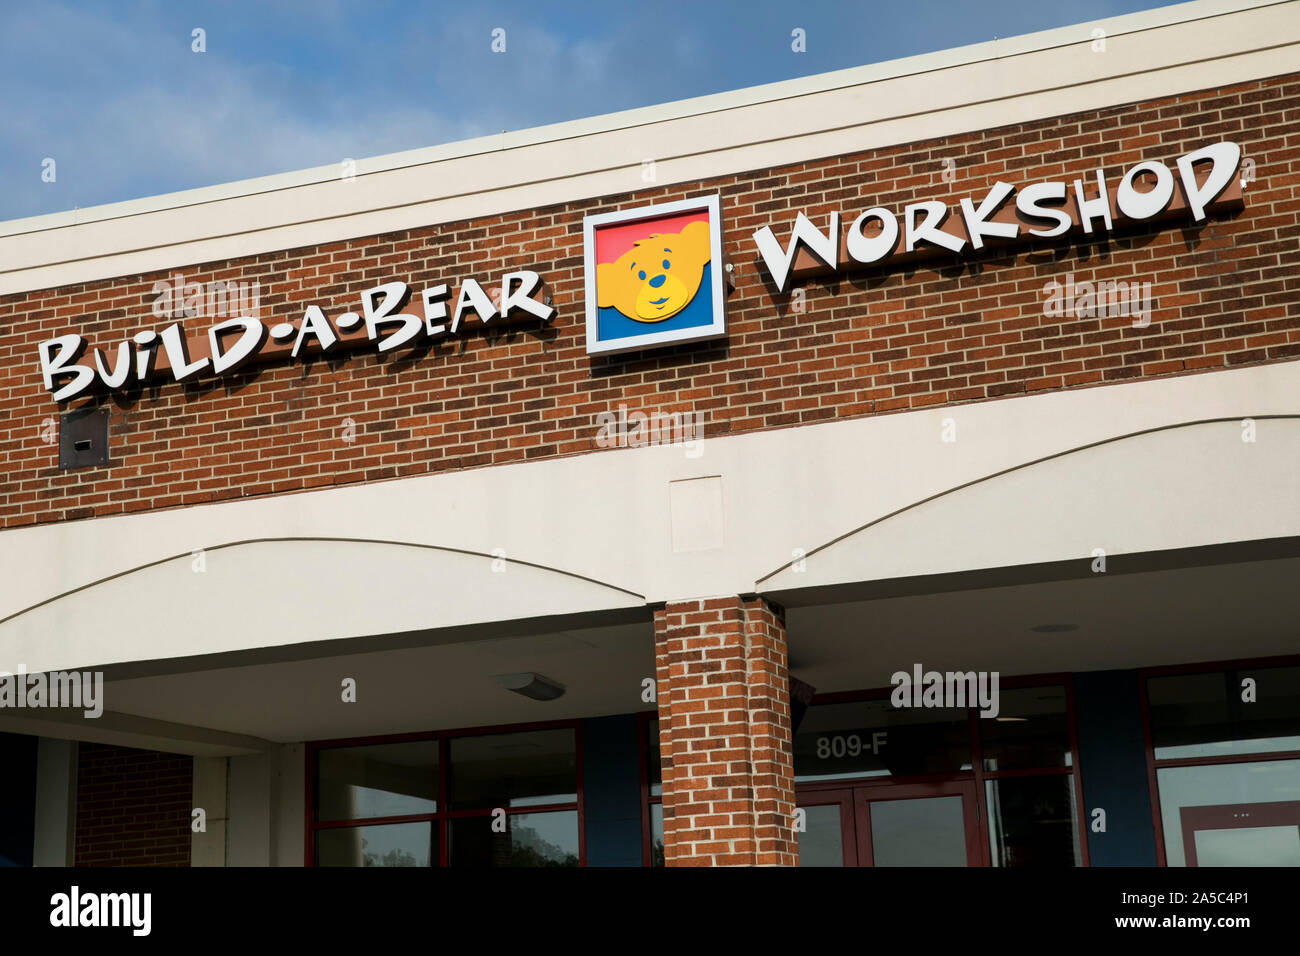 A logo sign outside of a Build-A-Bear Workshop retail store location in Greensboro, North Carolina on September 15, 2019. Stock Photo